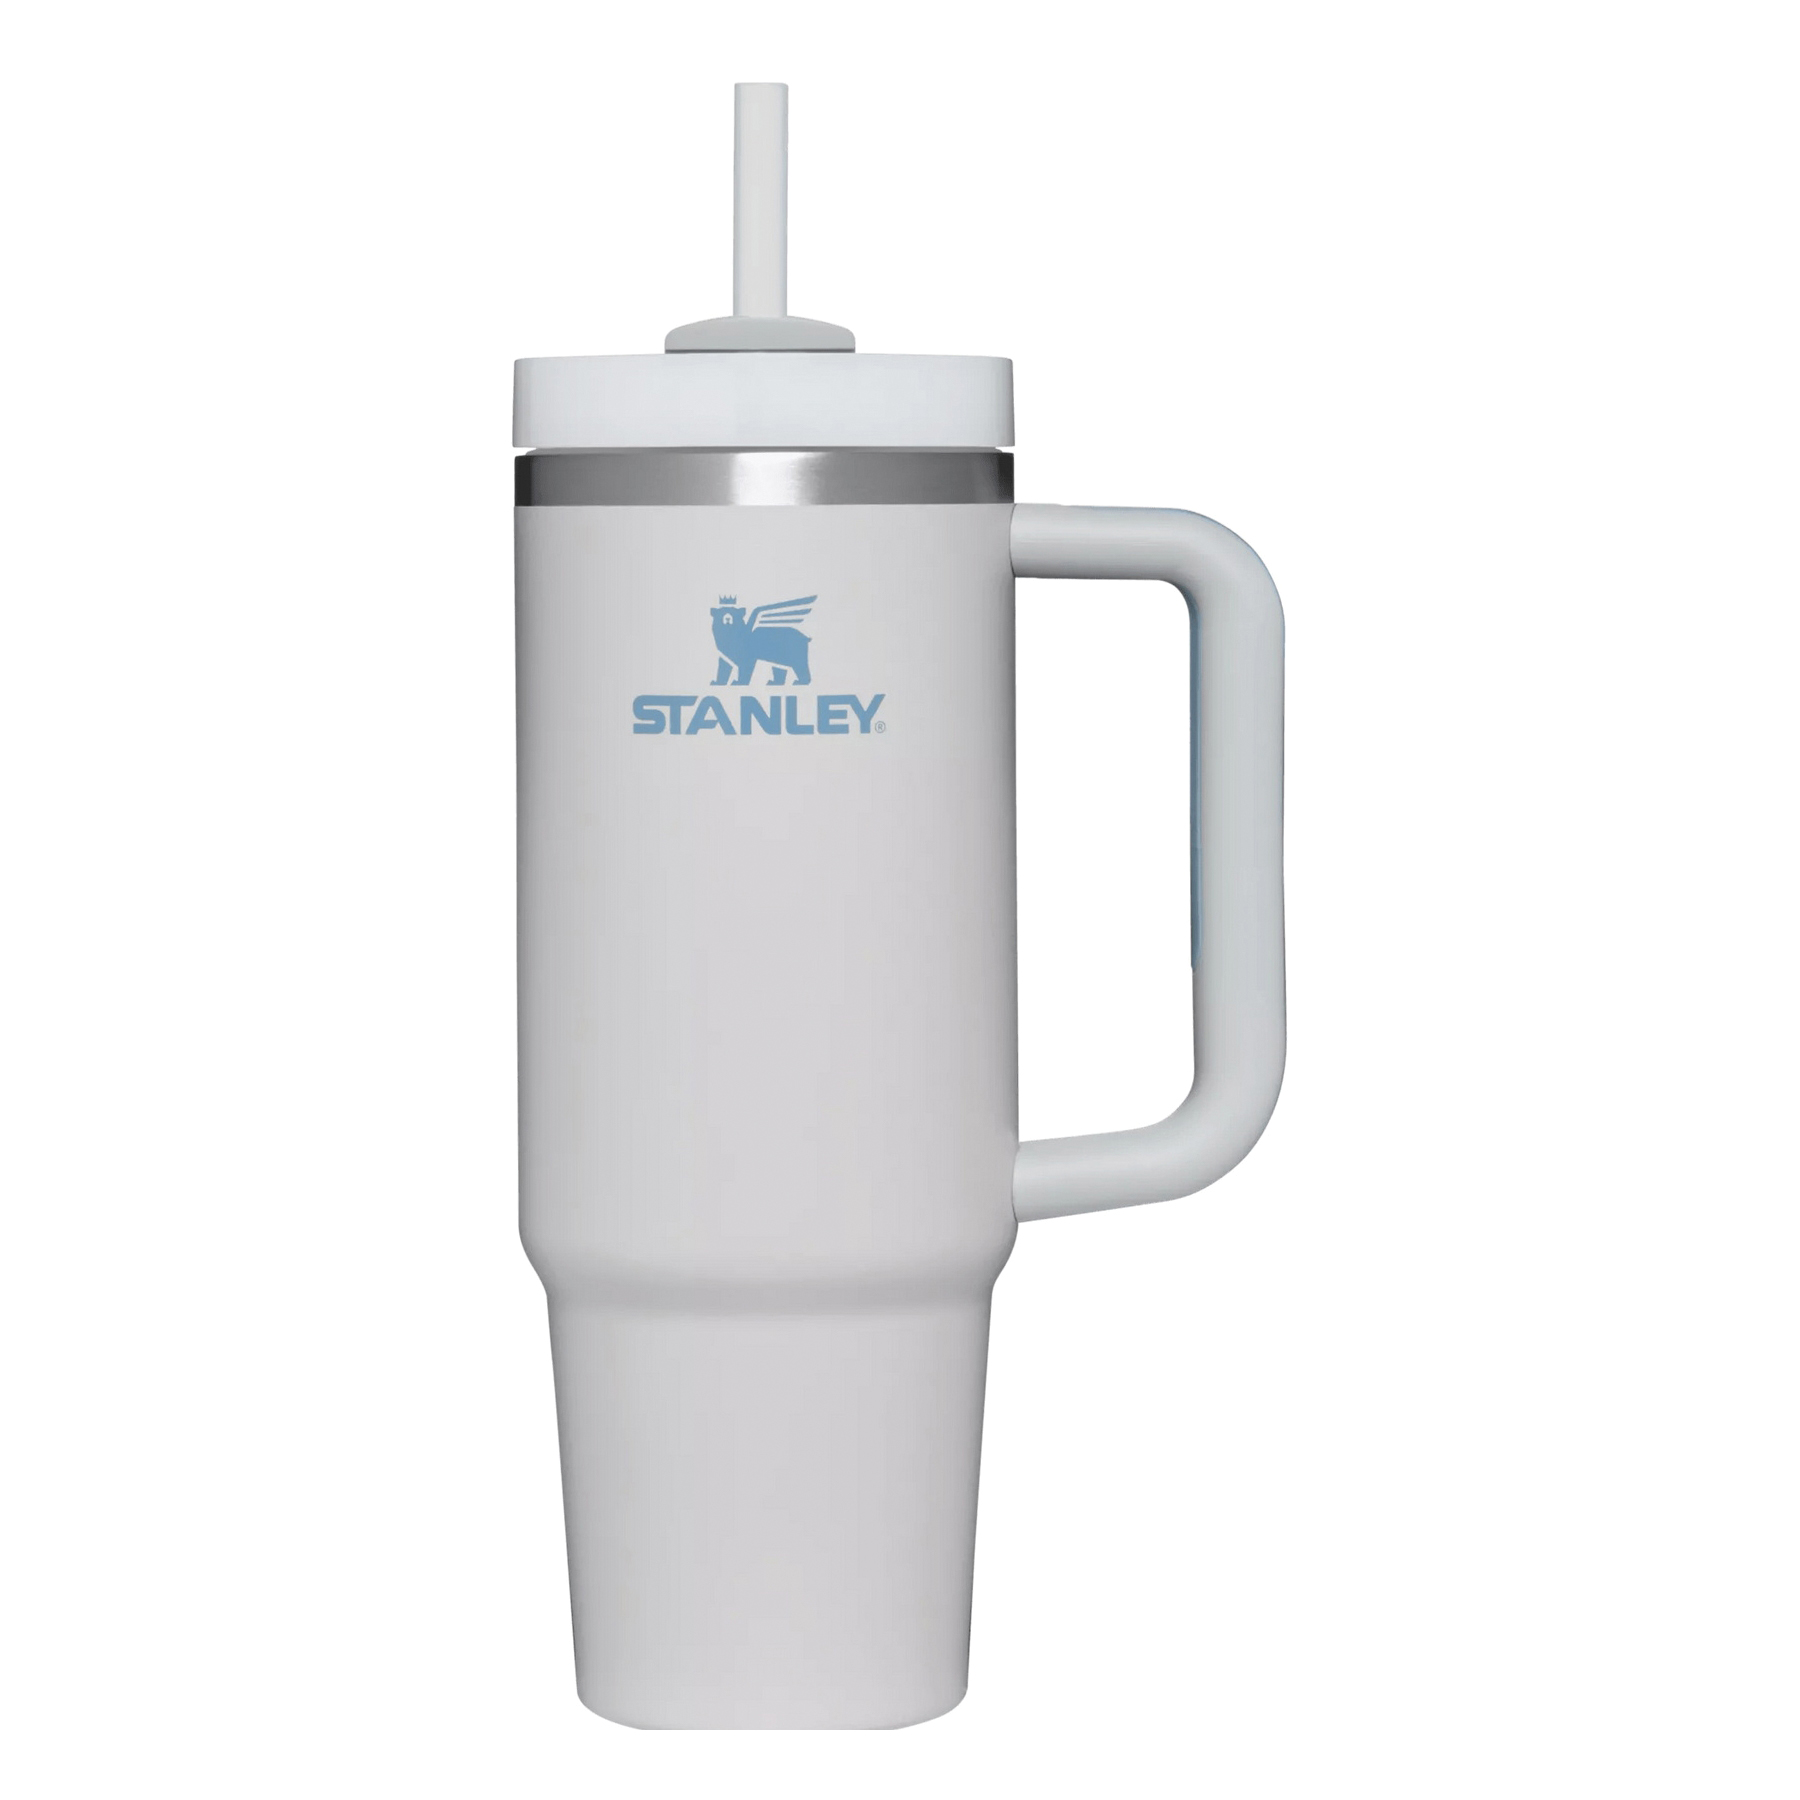 Stanley Adventure eCycle Camp Mug - Cups and Mugs